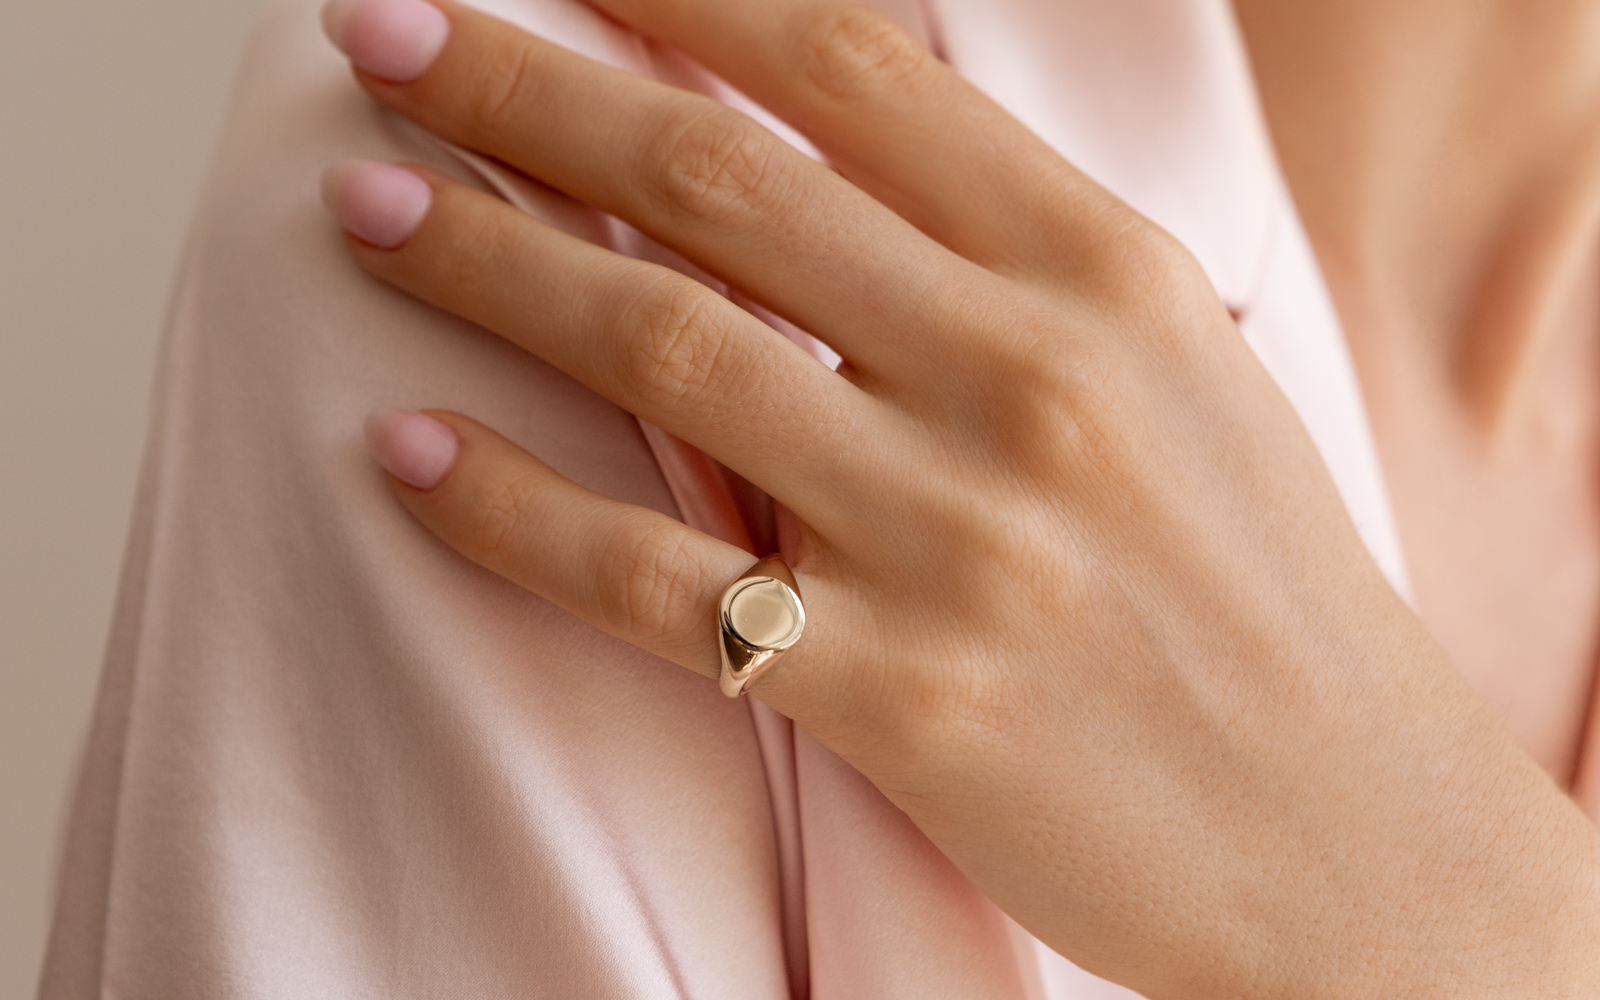 Signet Pinky Ring Yellow Gold